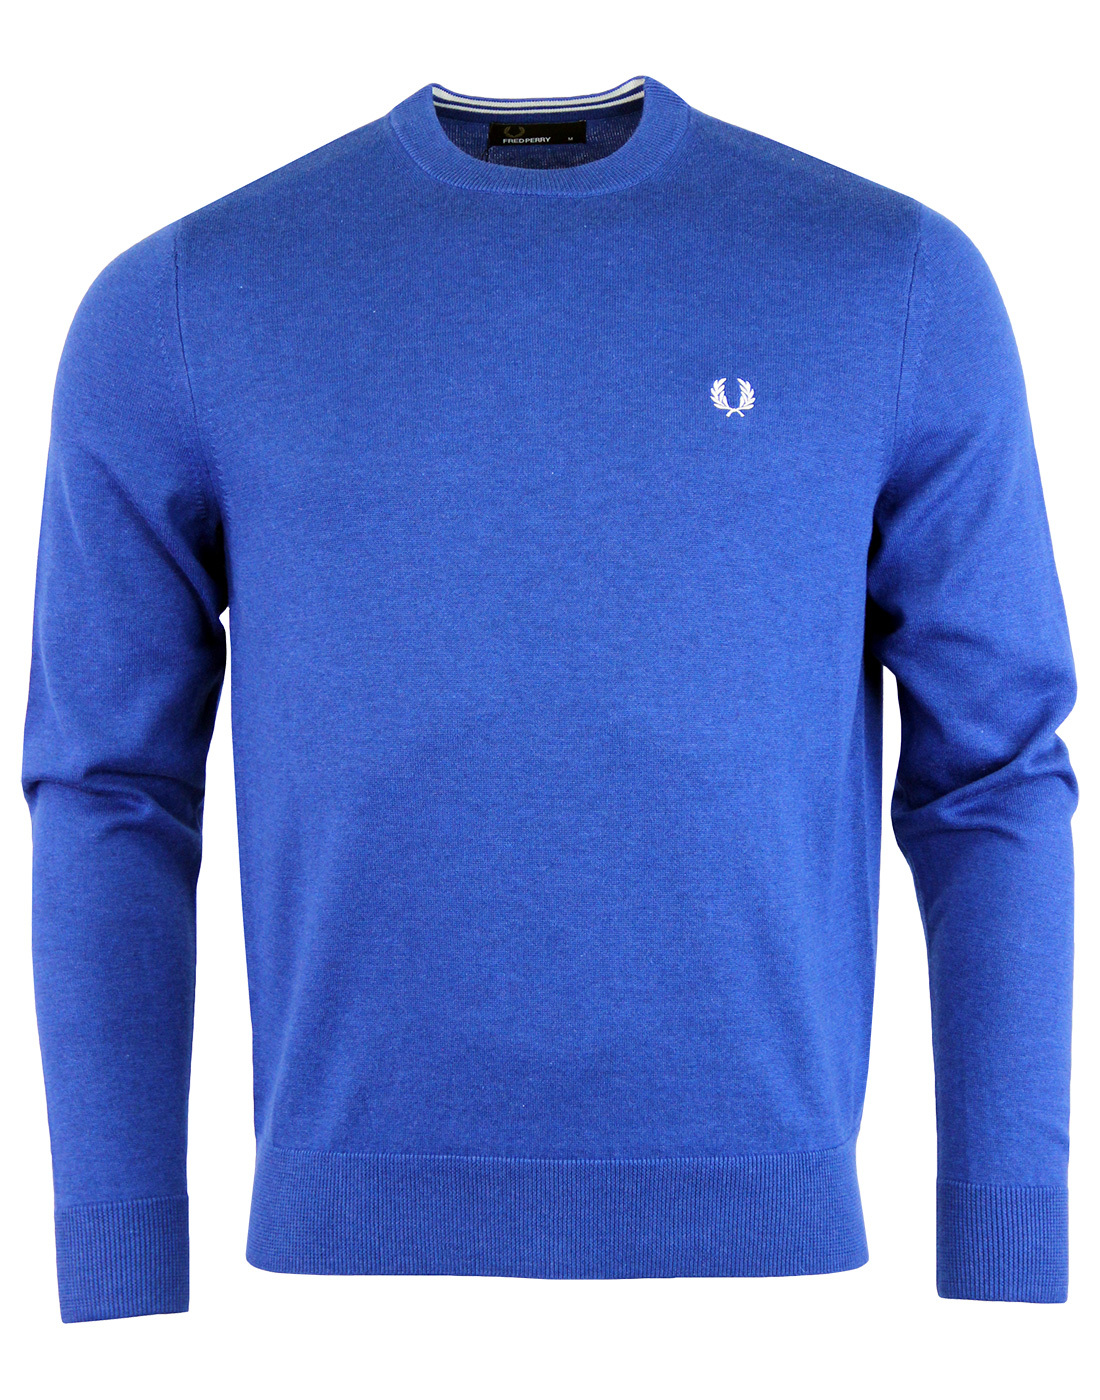 FRED PERRY Retro Mod Classic Crew Neck Sweater RB